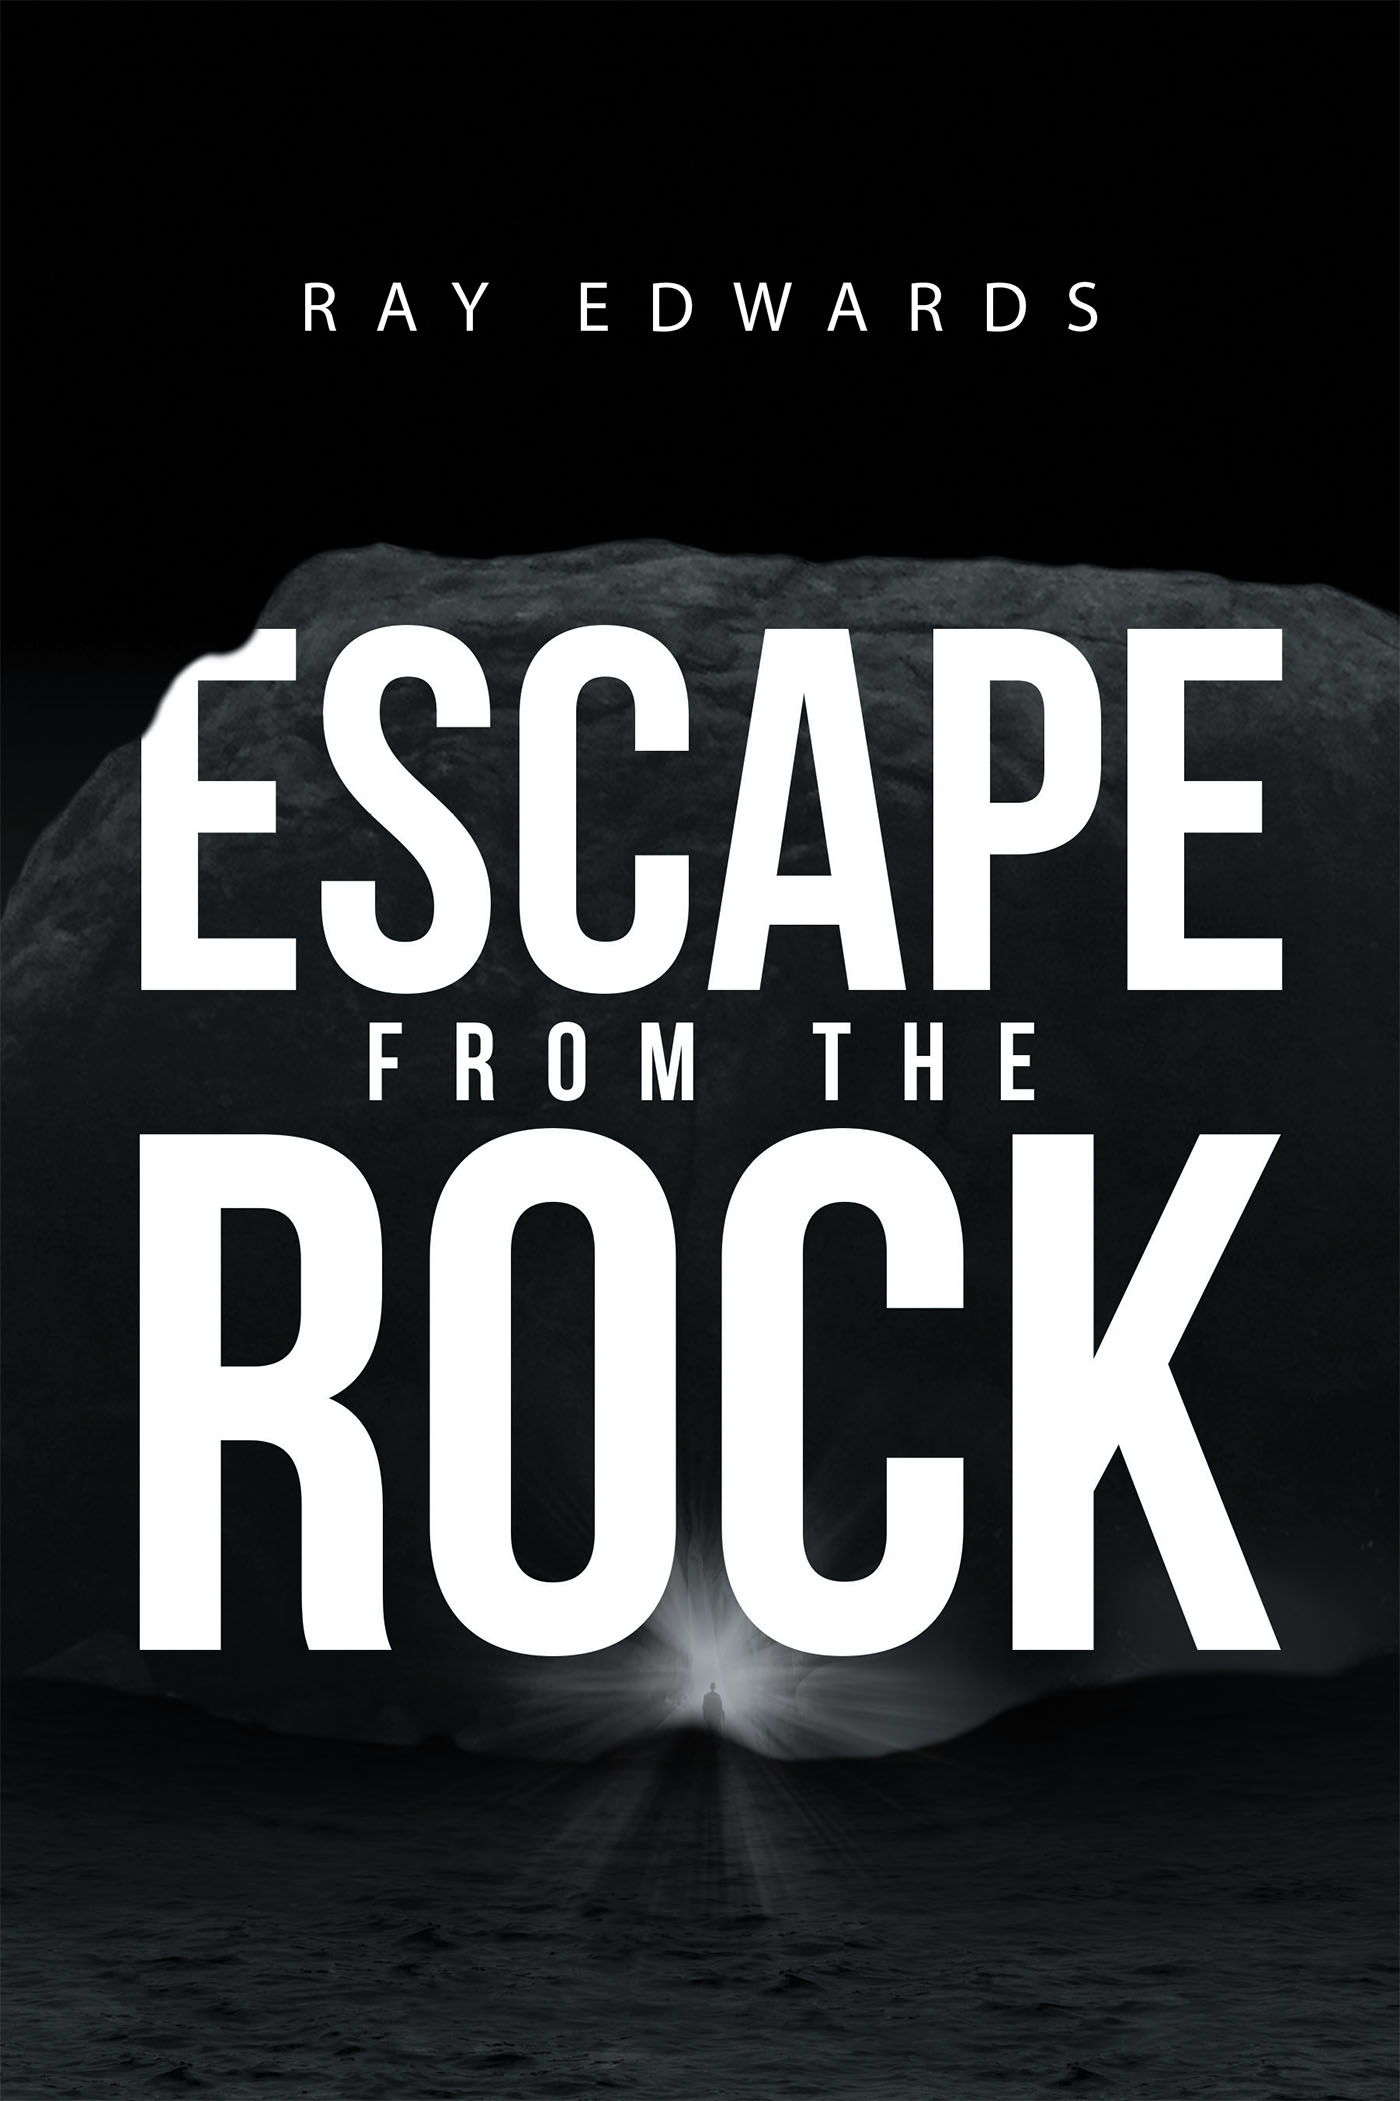 Ray Edwardss New Book “escape From The Rock” Is A Telling And Honest